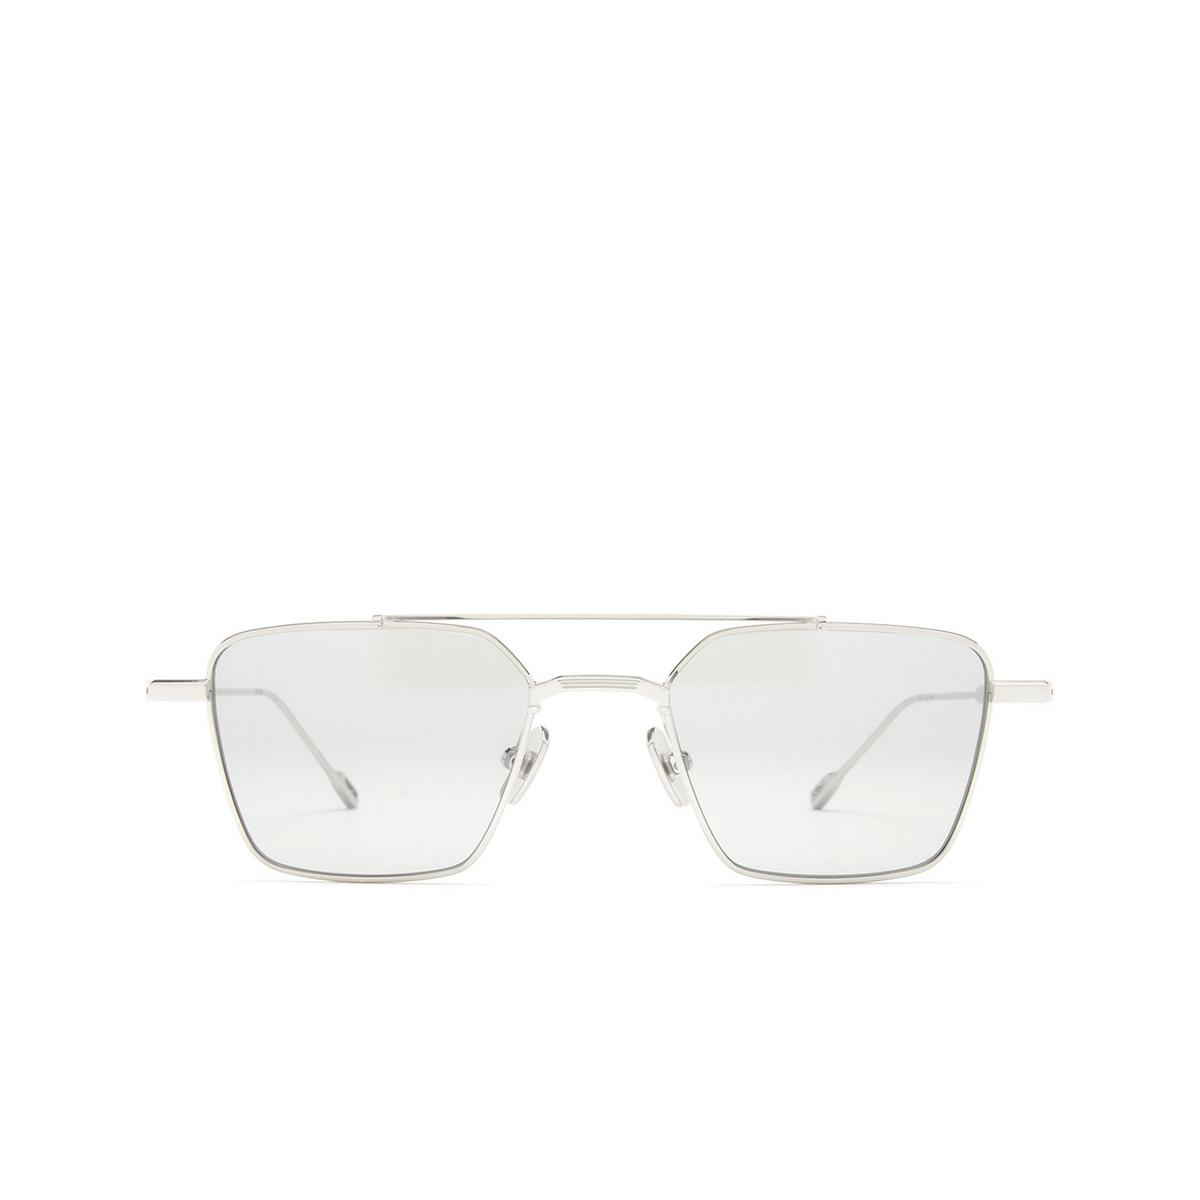 Native Sons® Irregular Sunglasses: Yeager Exp color Silver - front view.